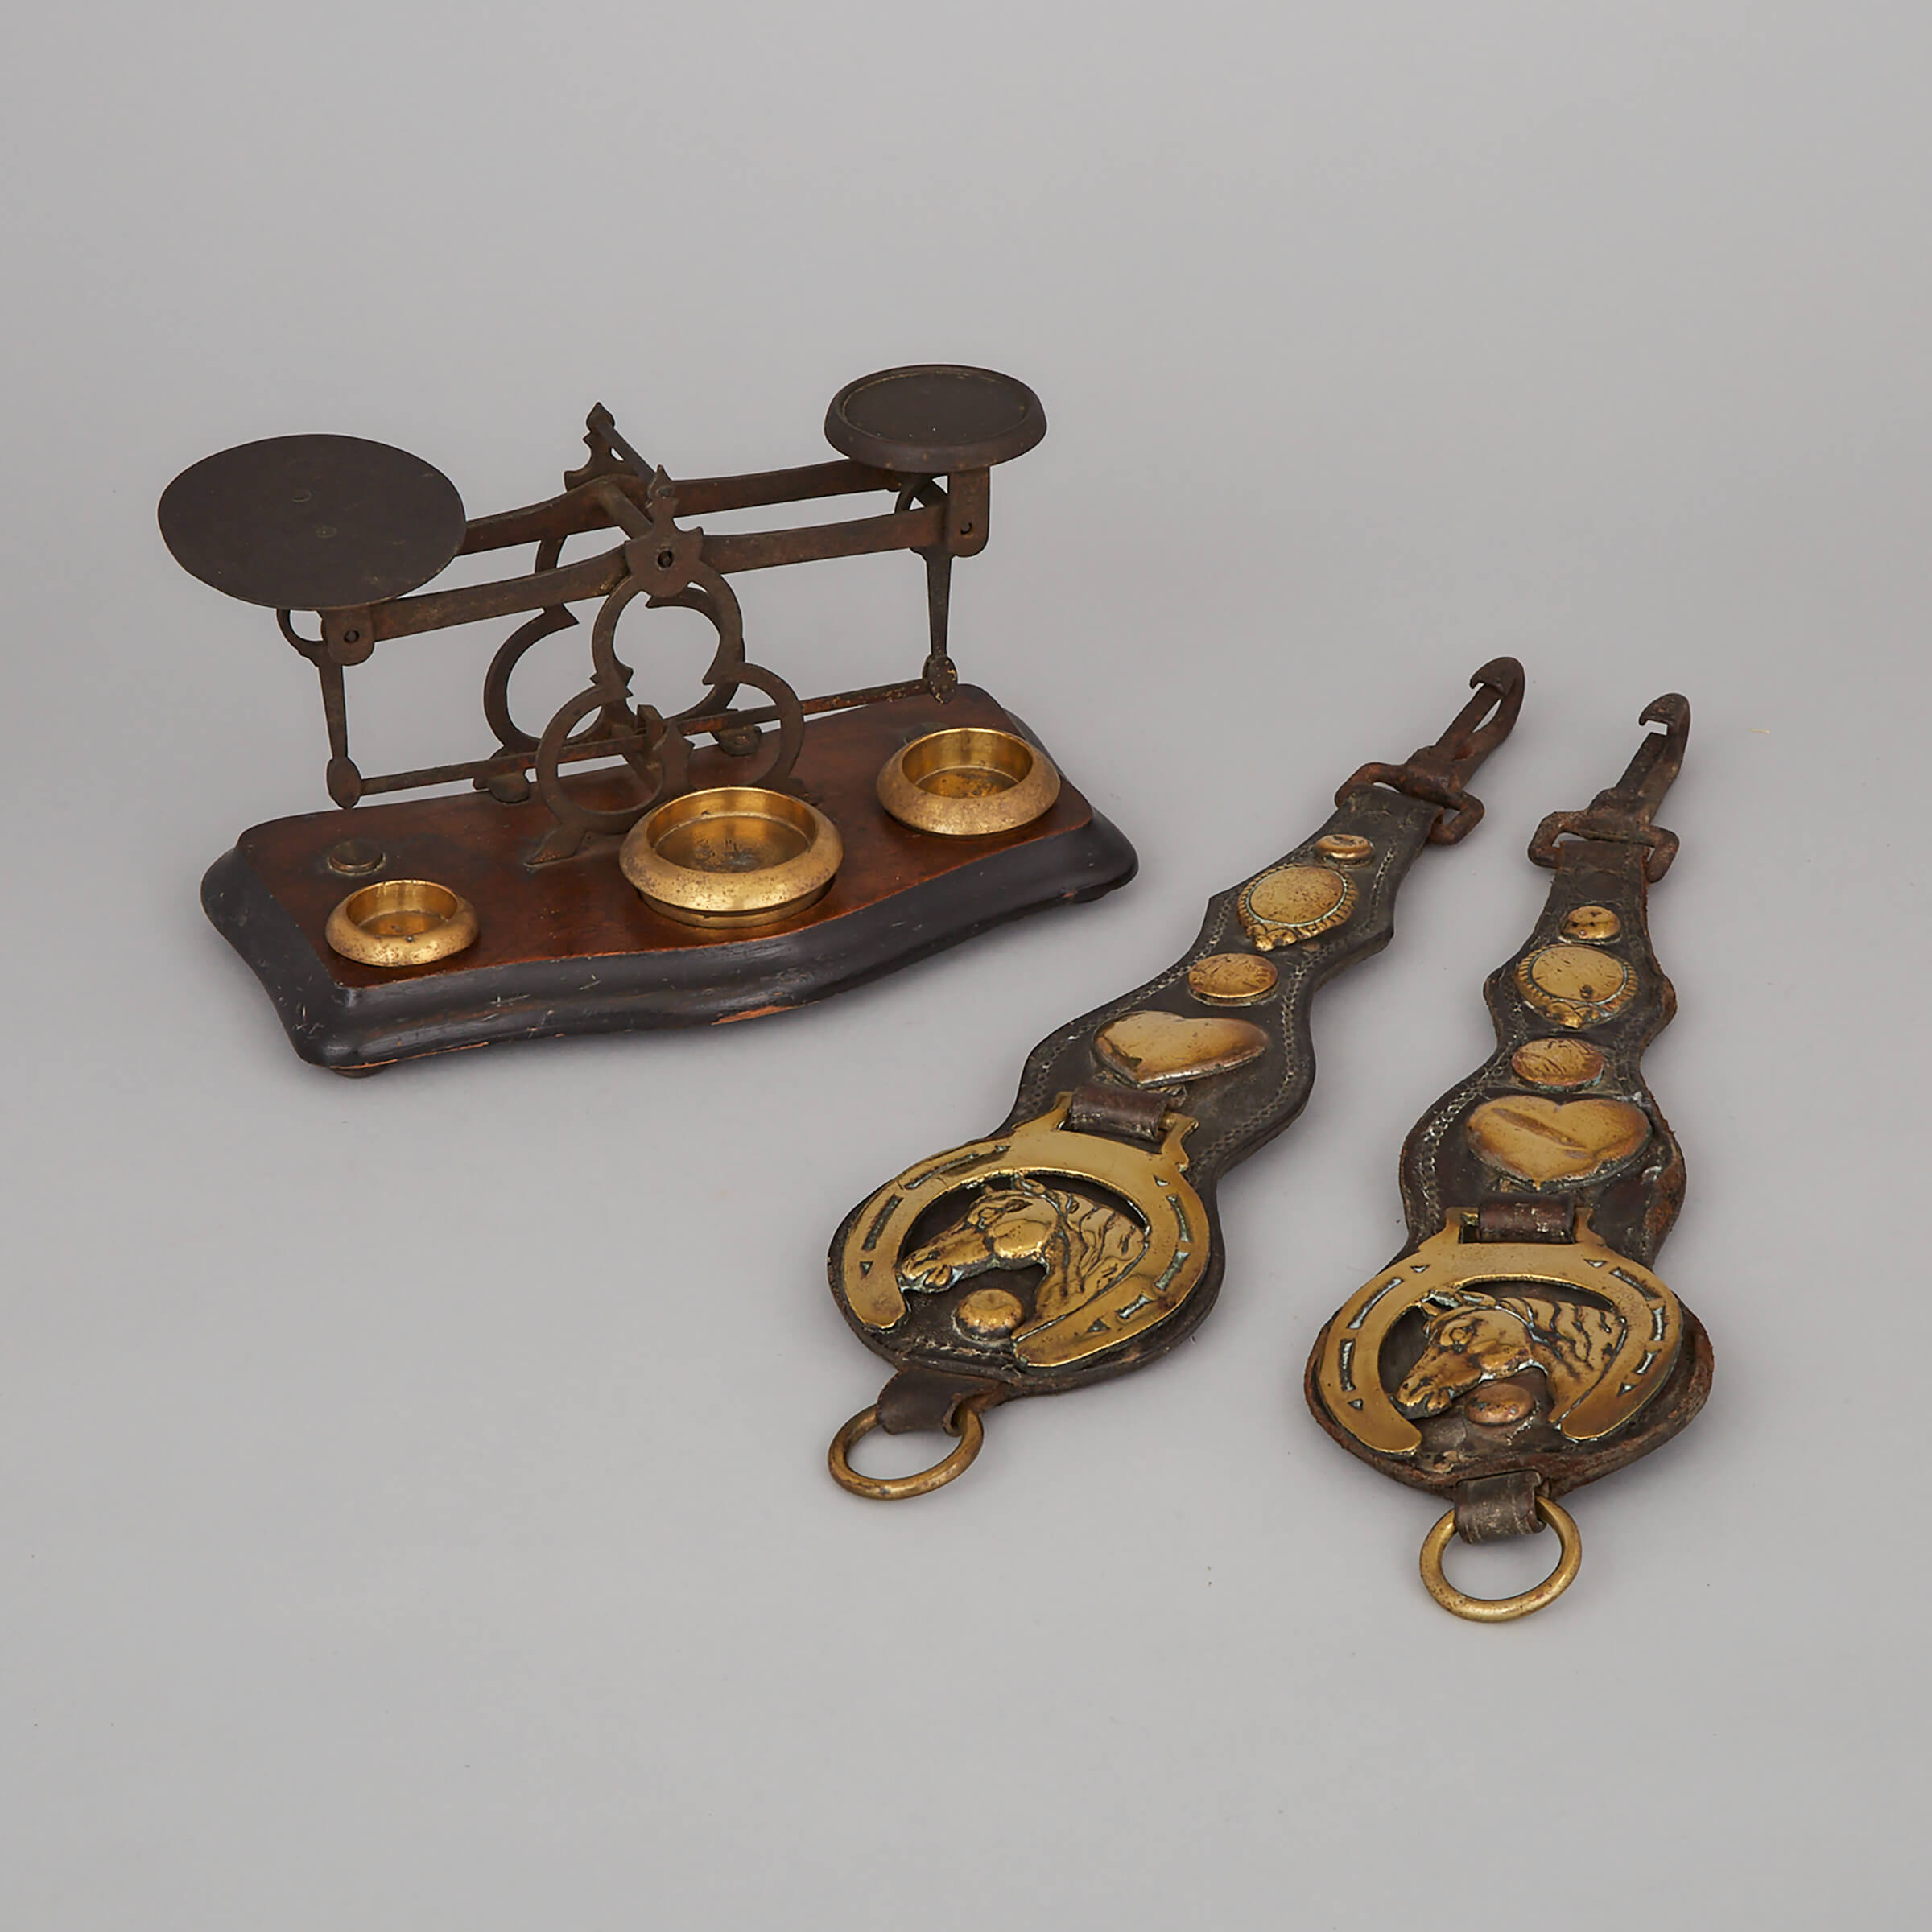 Pair of Horse Brass Mounted Leather Straps and a Postal Scale, 19th century